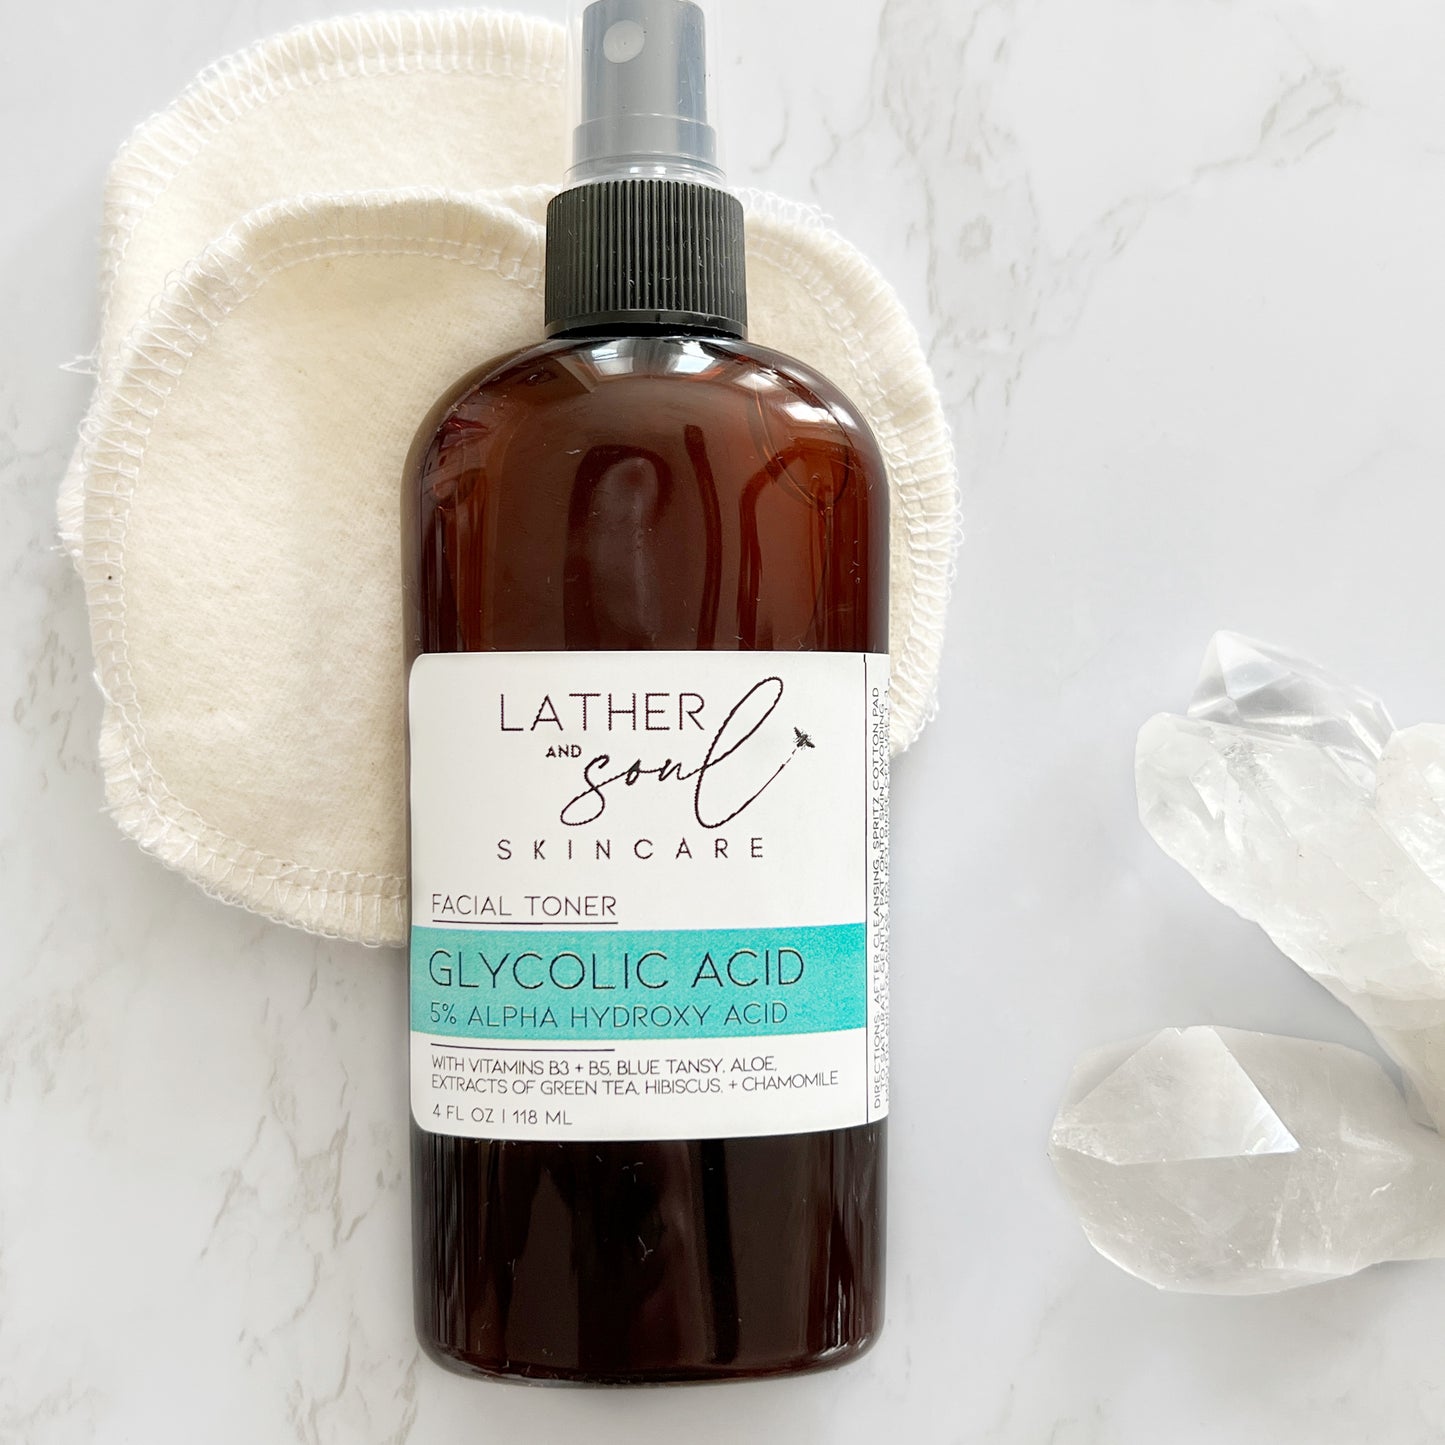 Glycolic Acid Facial Toner for chemical exfoliation by Lather and Soul Skincare